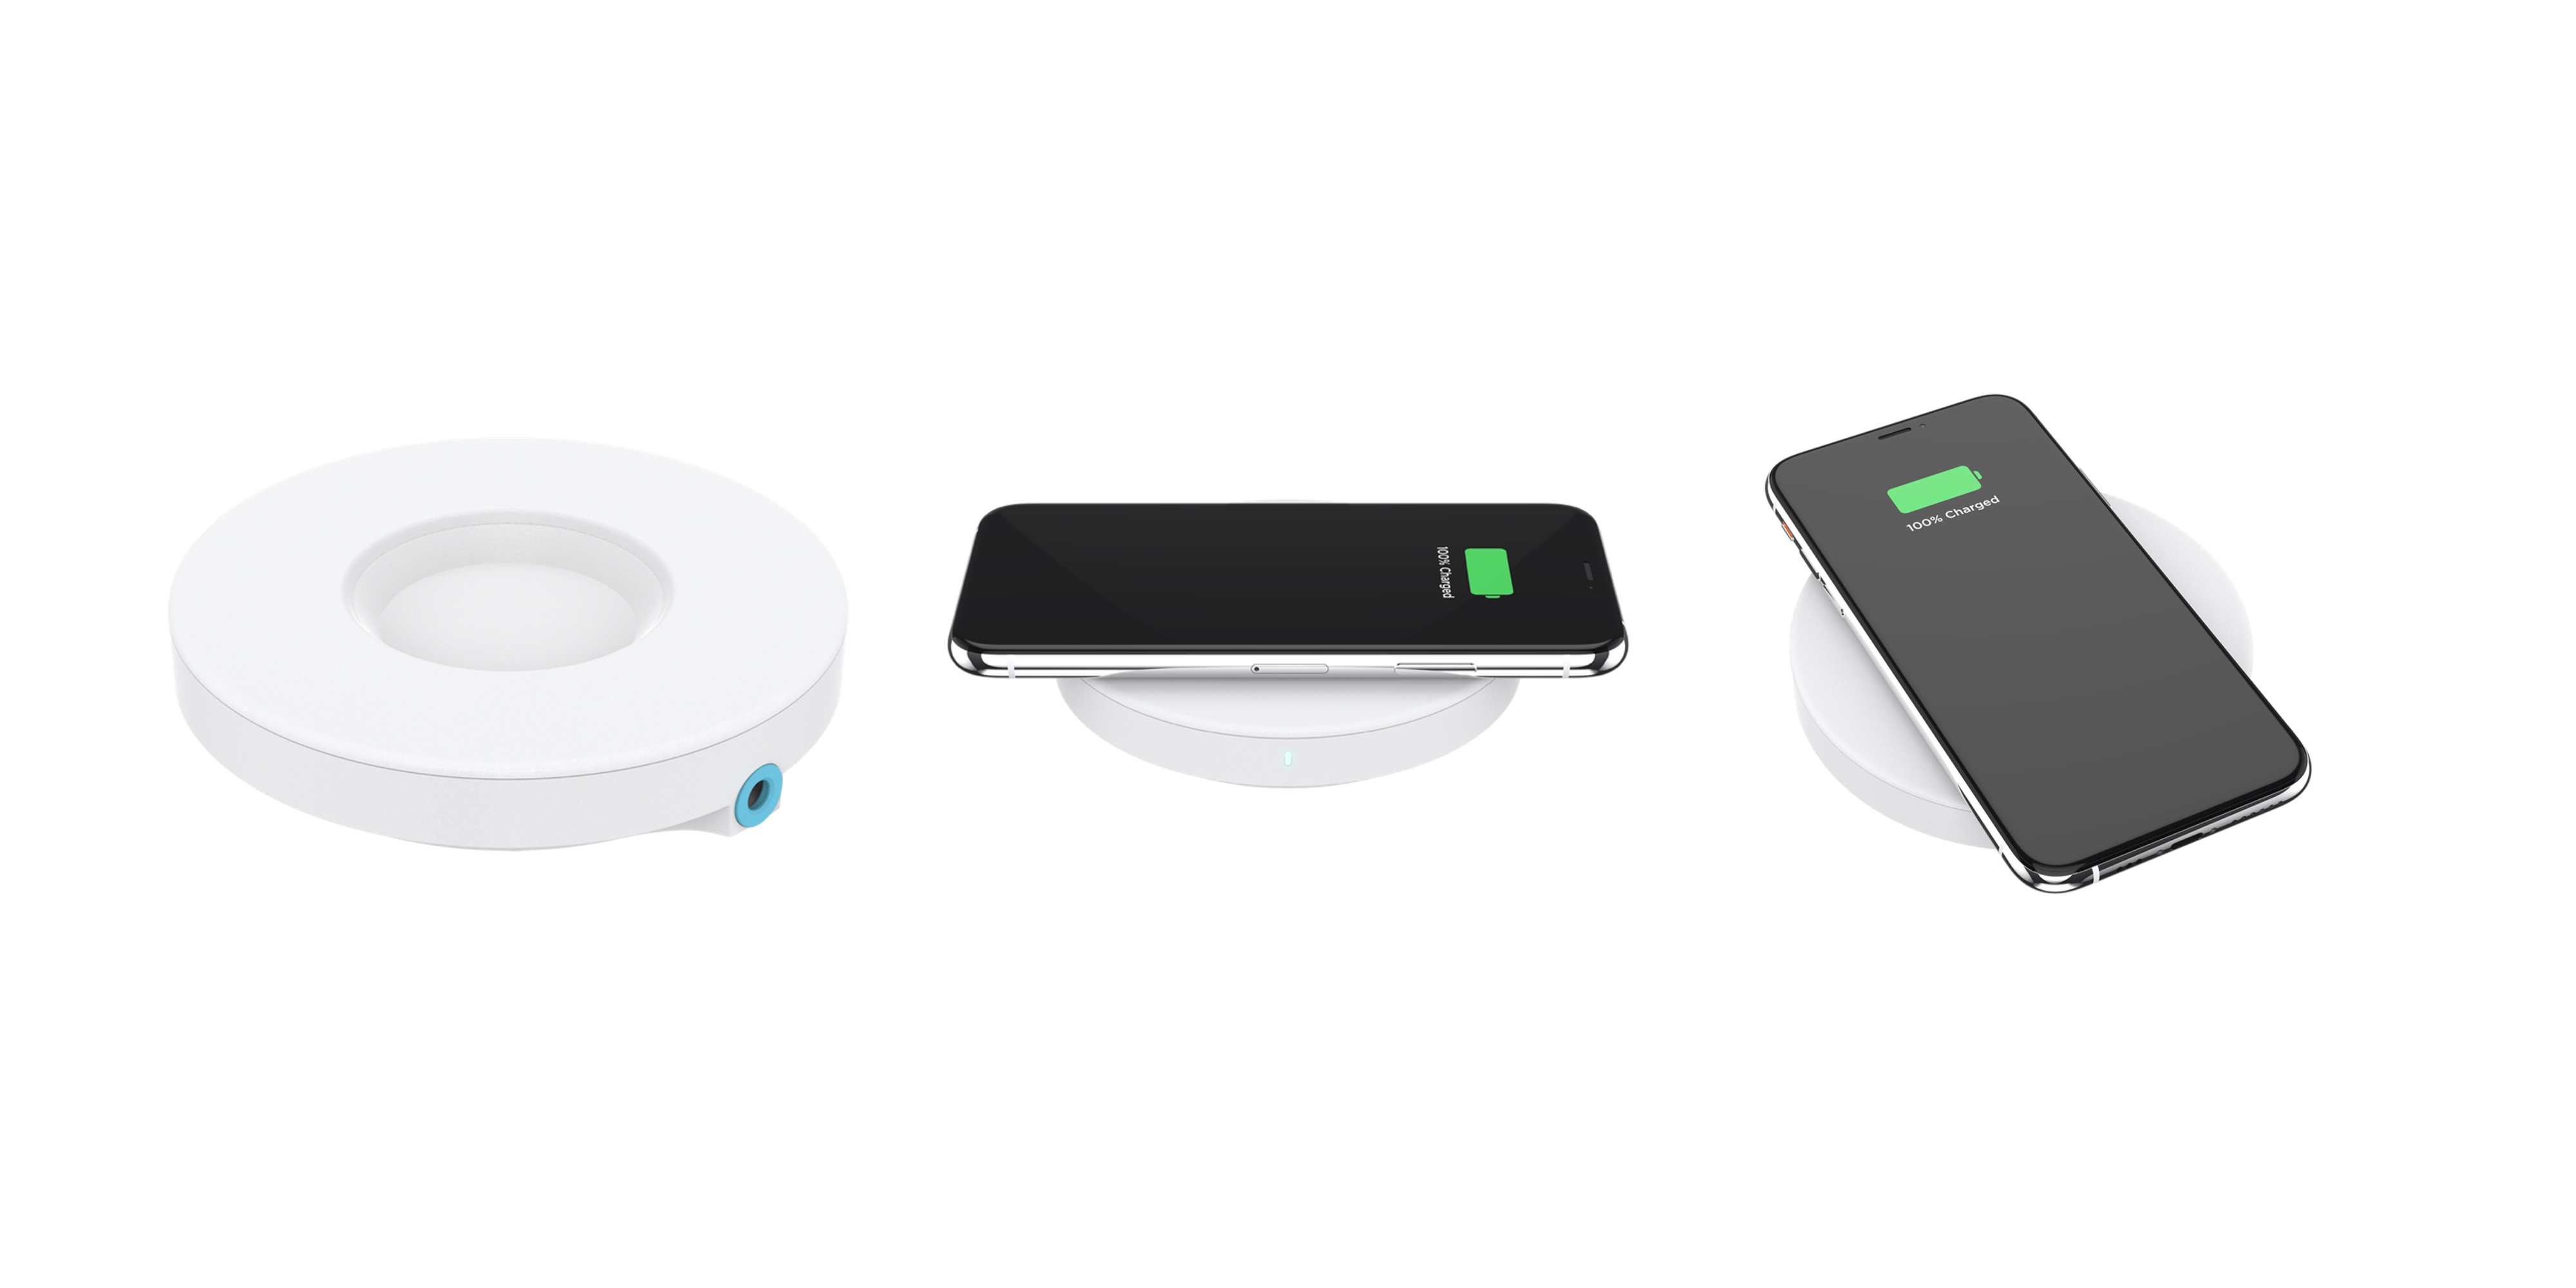 You can now use a Popsocket + wirelessly charge your iPhone - 9to5Mac